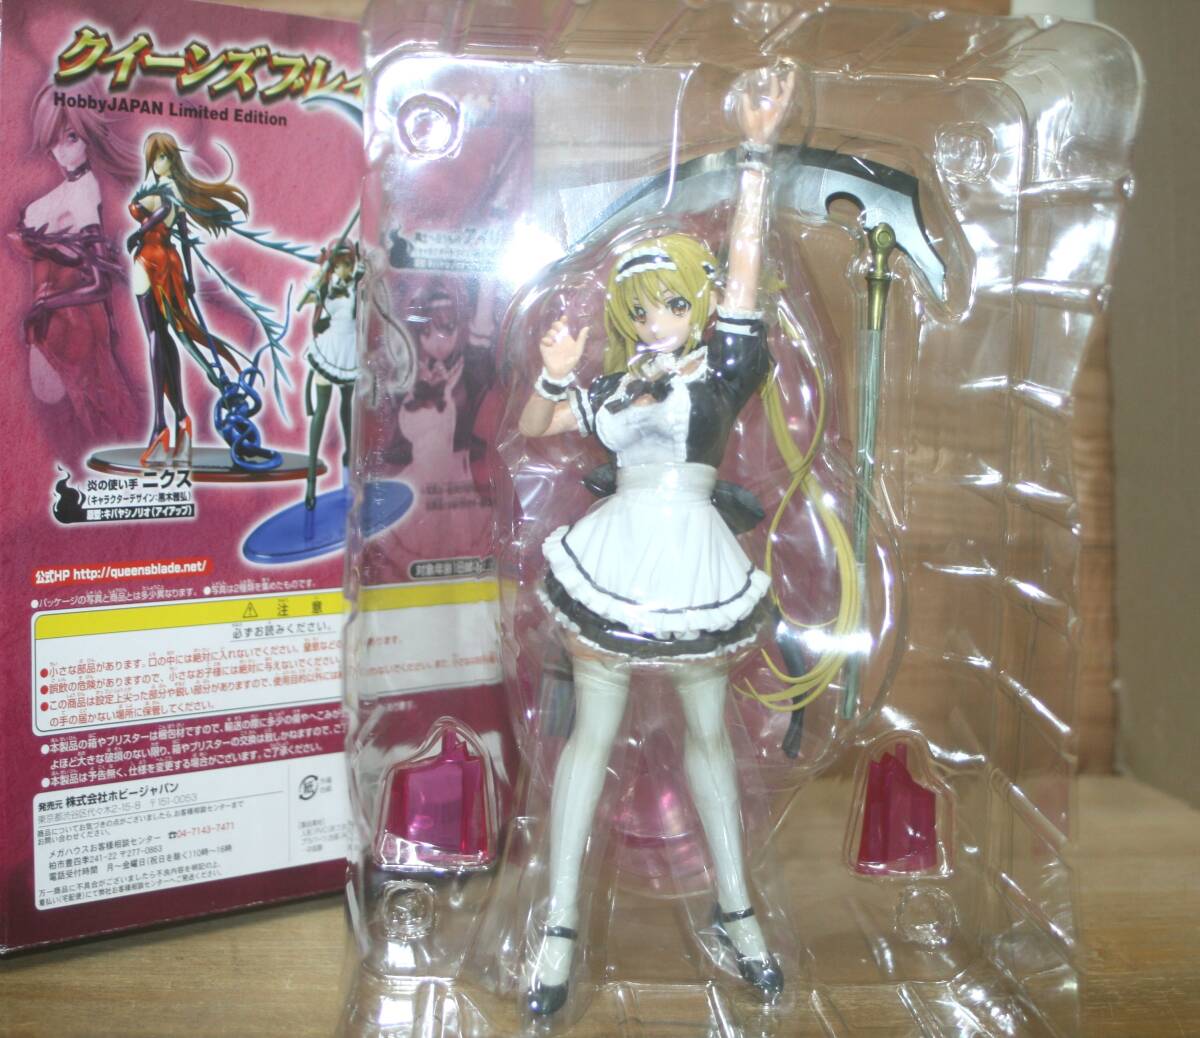  Bliss ta unopened *. earth ... thing I li2P color Ver. WF limitation Queen's Blade excellent model (1/8 mega house,tomoe, cast off 